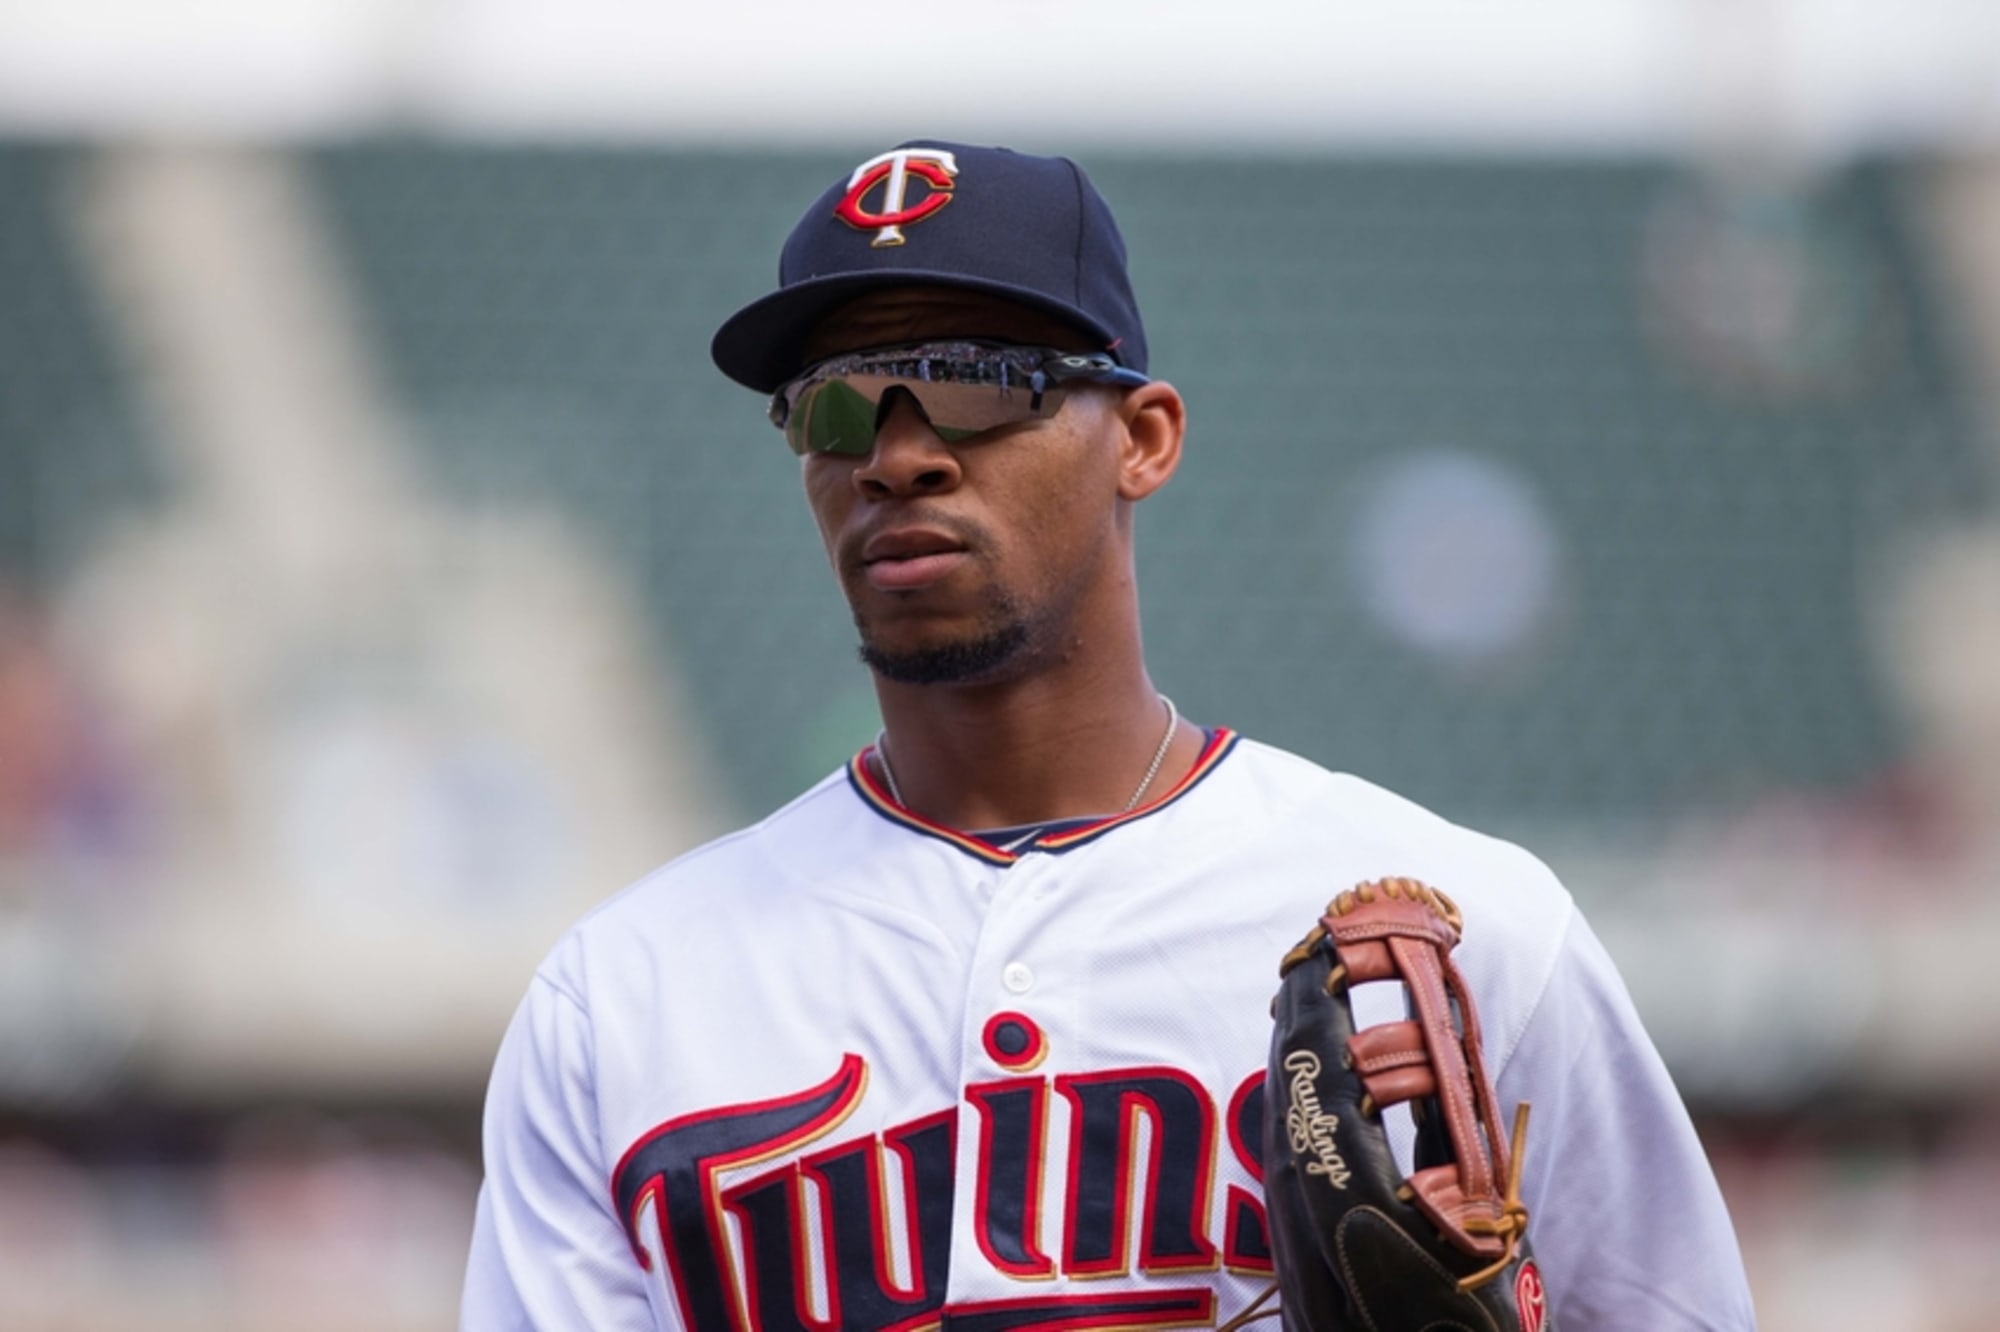 Byron Buxton is ON FIRE!! Has hit SIX home runs in SIX games! 